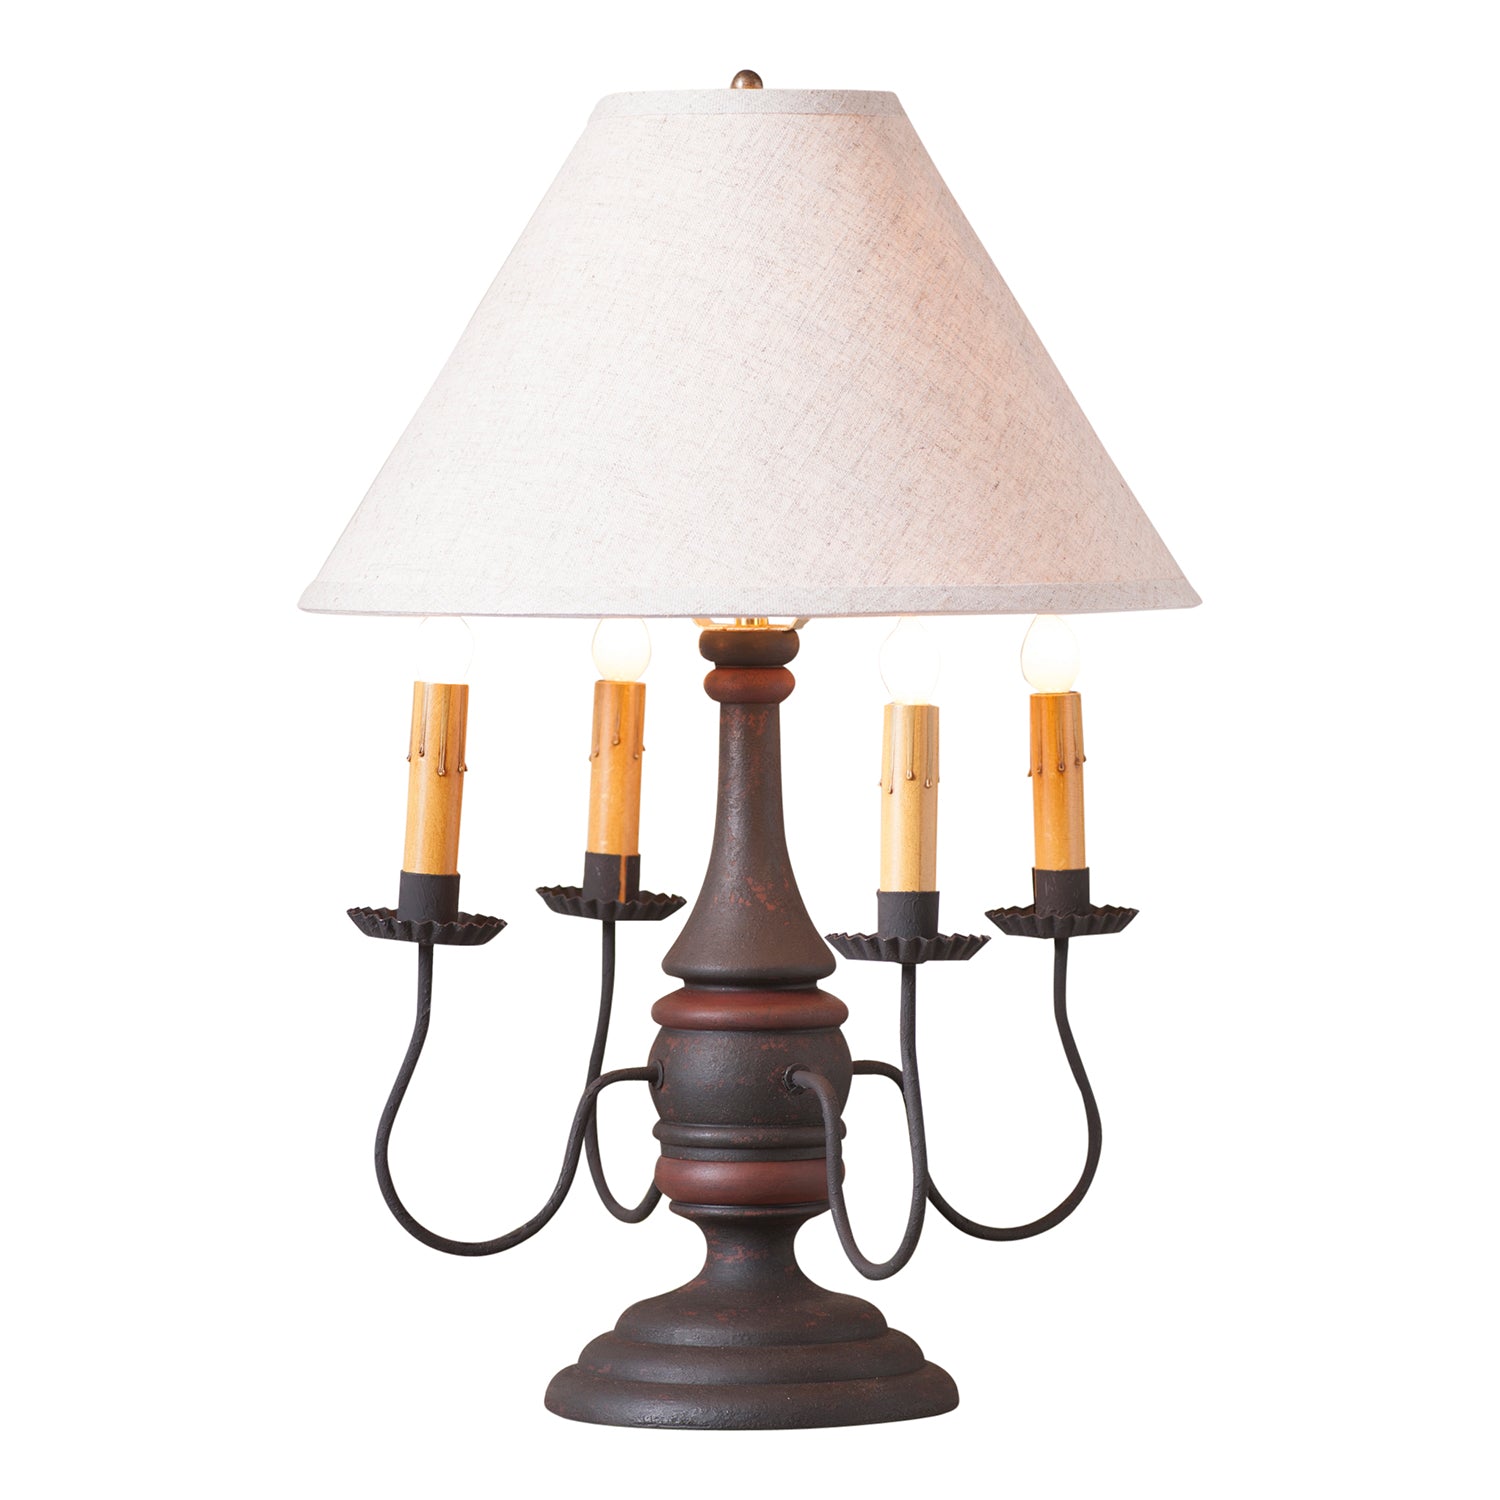 Jamestown Lamp in Hartford Black and Red with Linen Ivory Shade